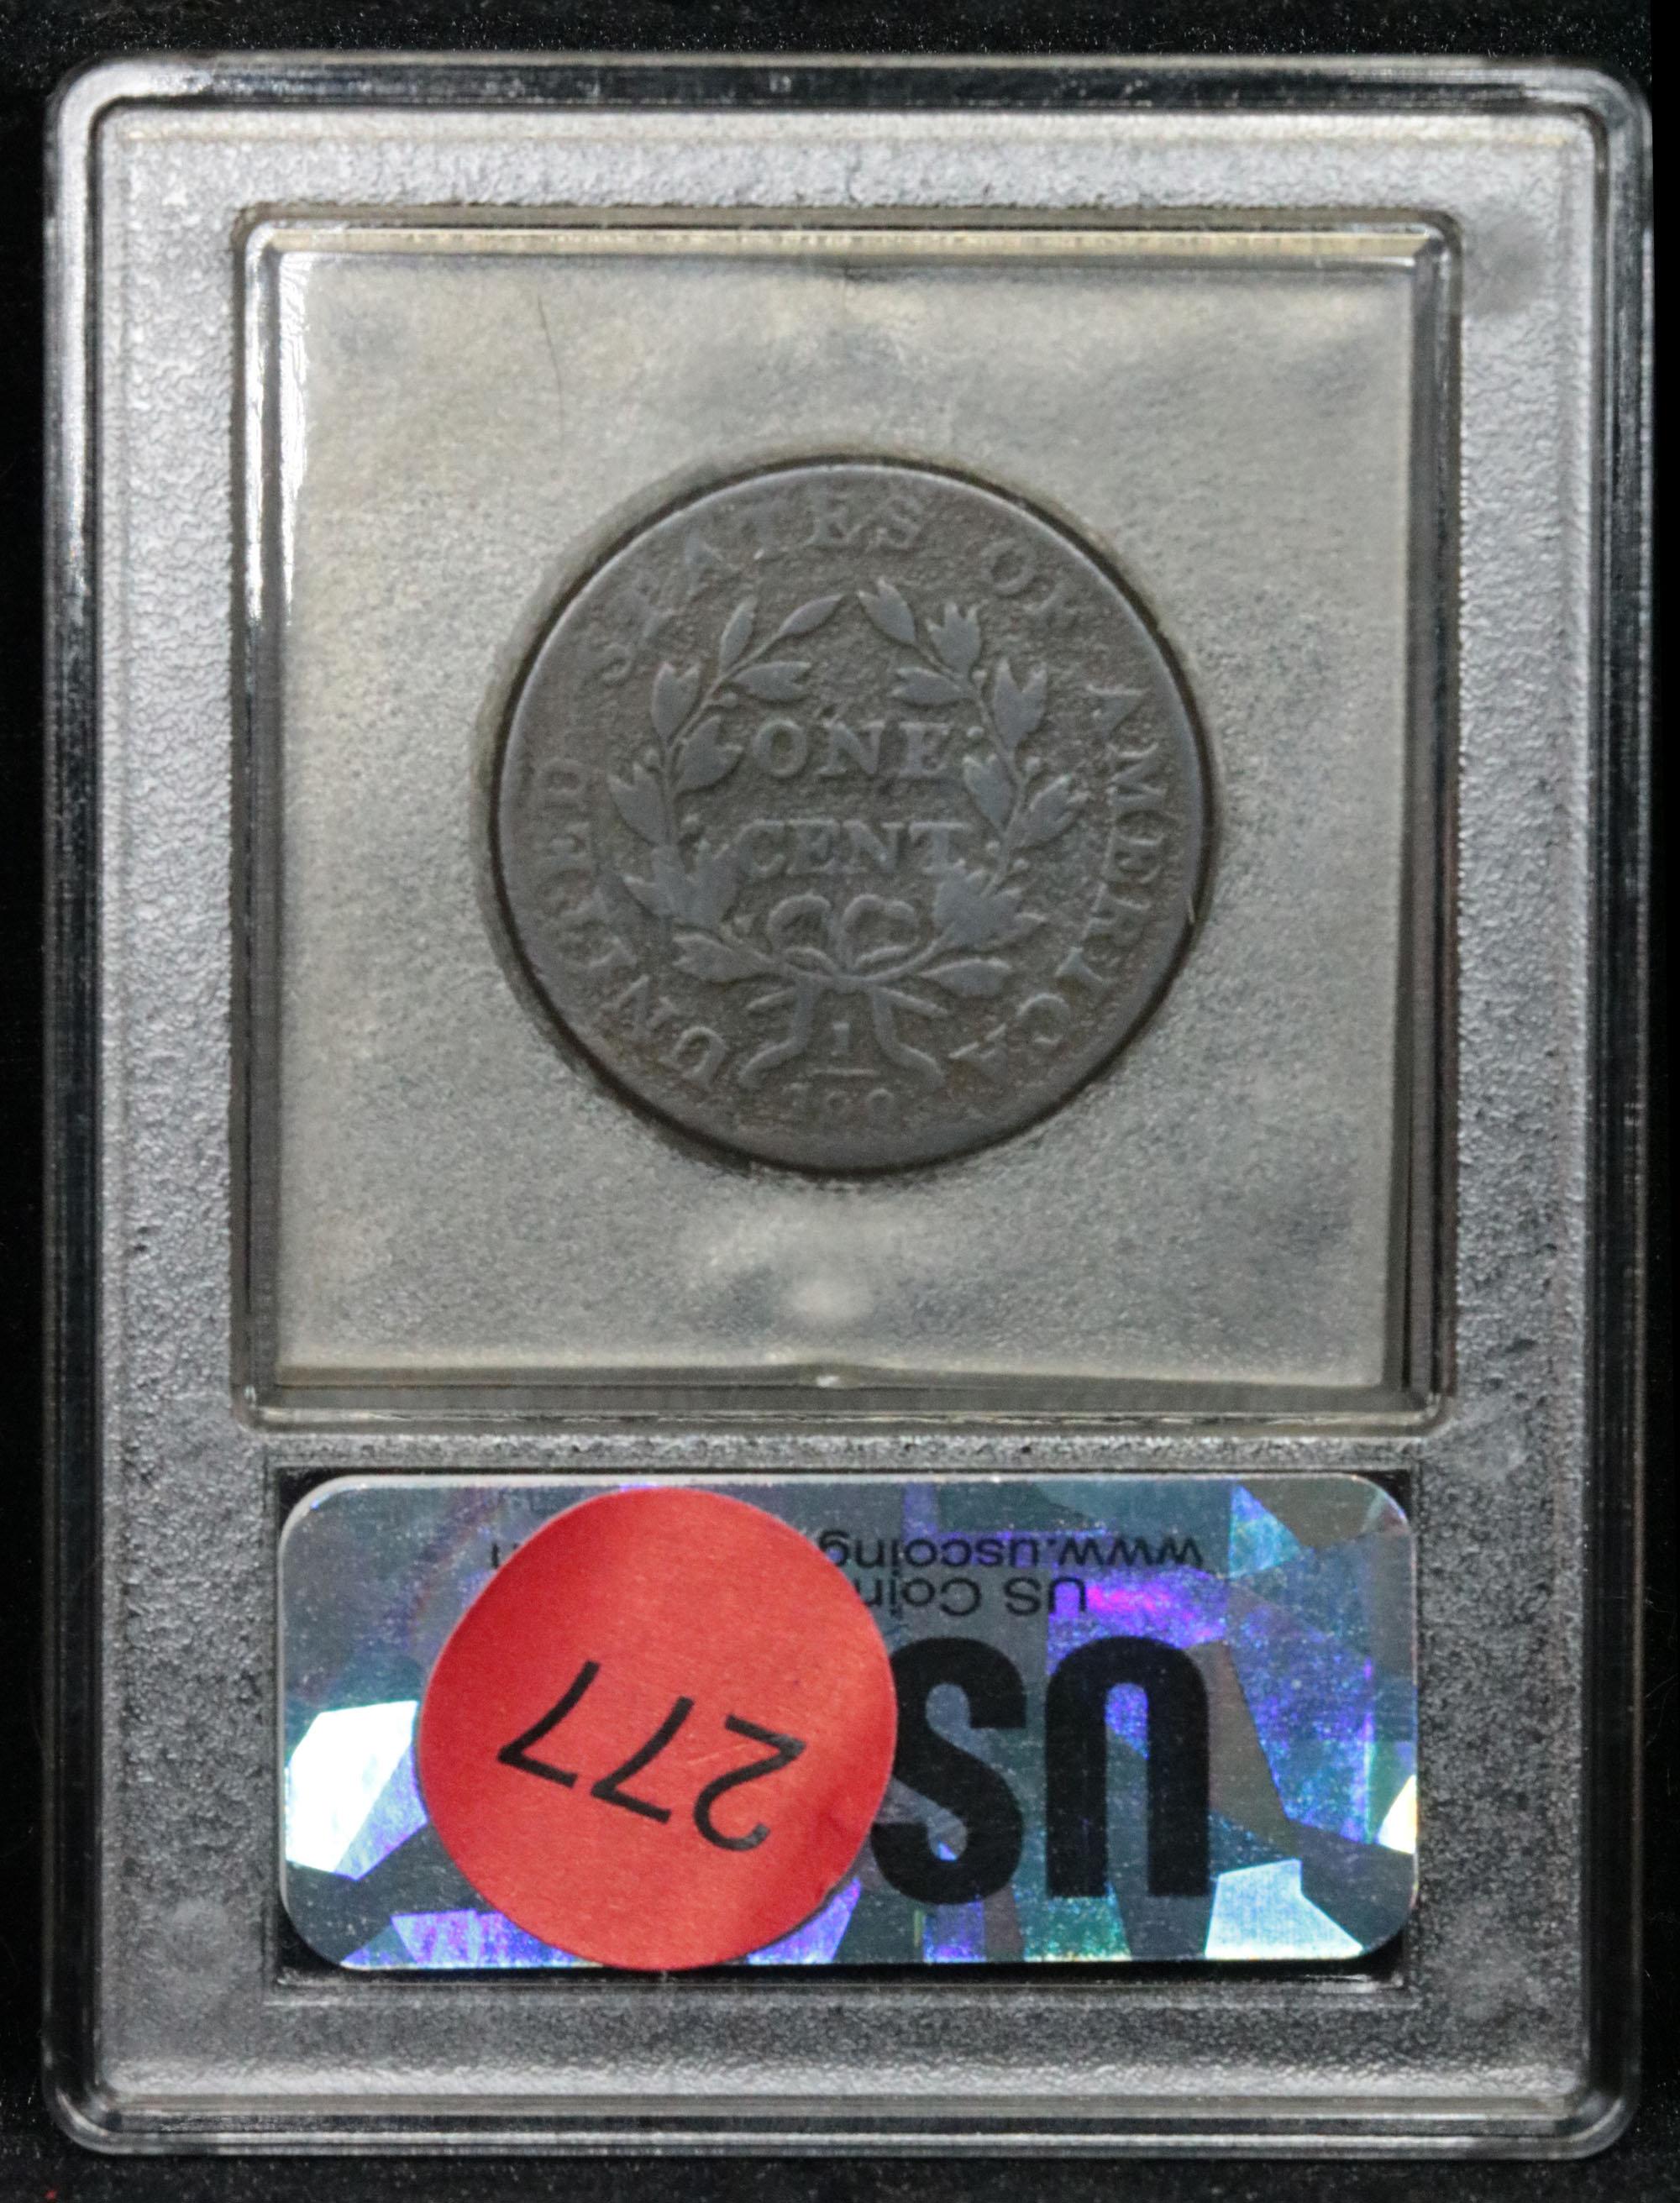 ***Auction Highlight*** 1800/798 1st Hair Draped Bust Large Cent 1c Graded f+ by USCG (fc)